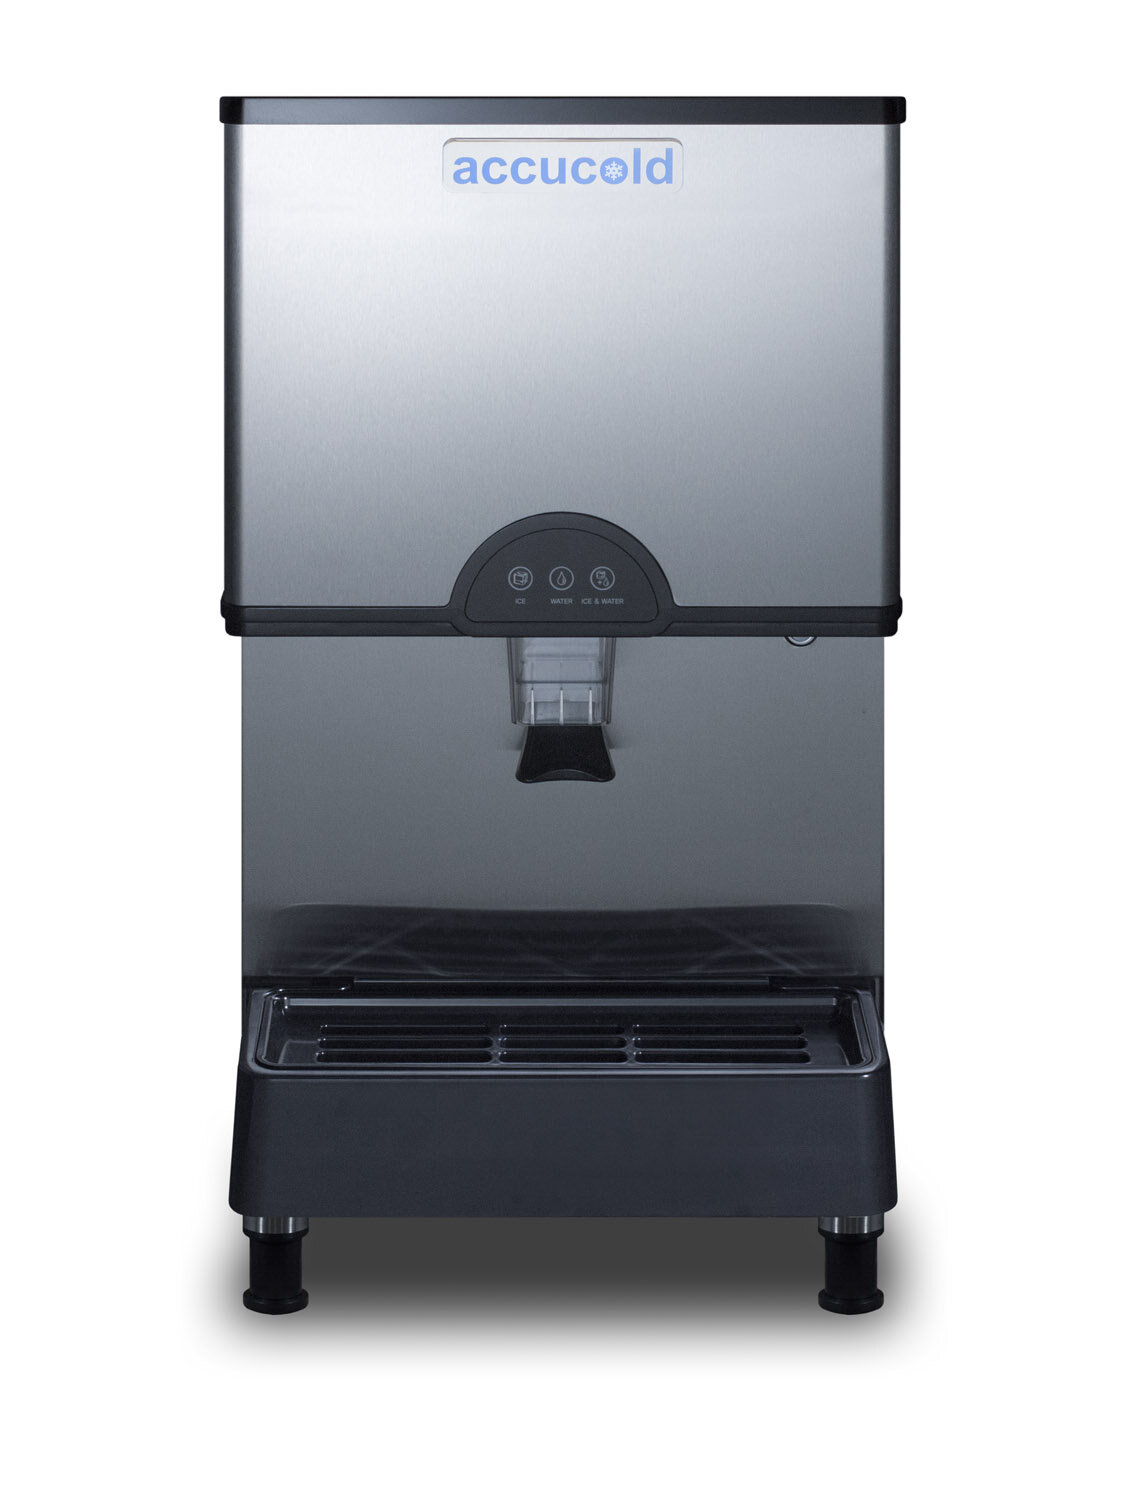 AstroAI Expands into Home Appliances with HiCOZY Nugget Ice Maker